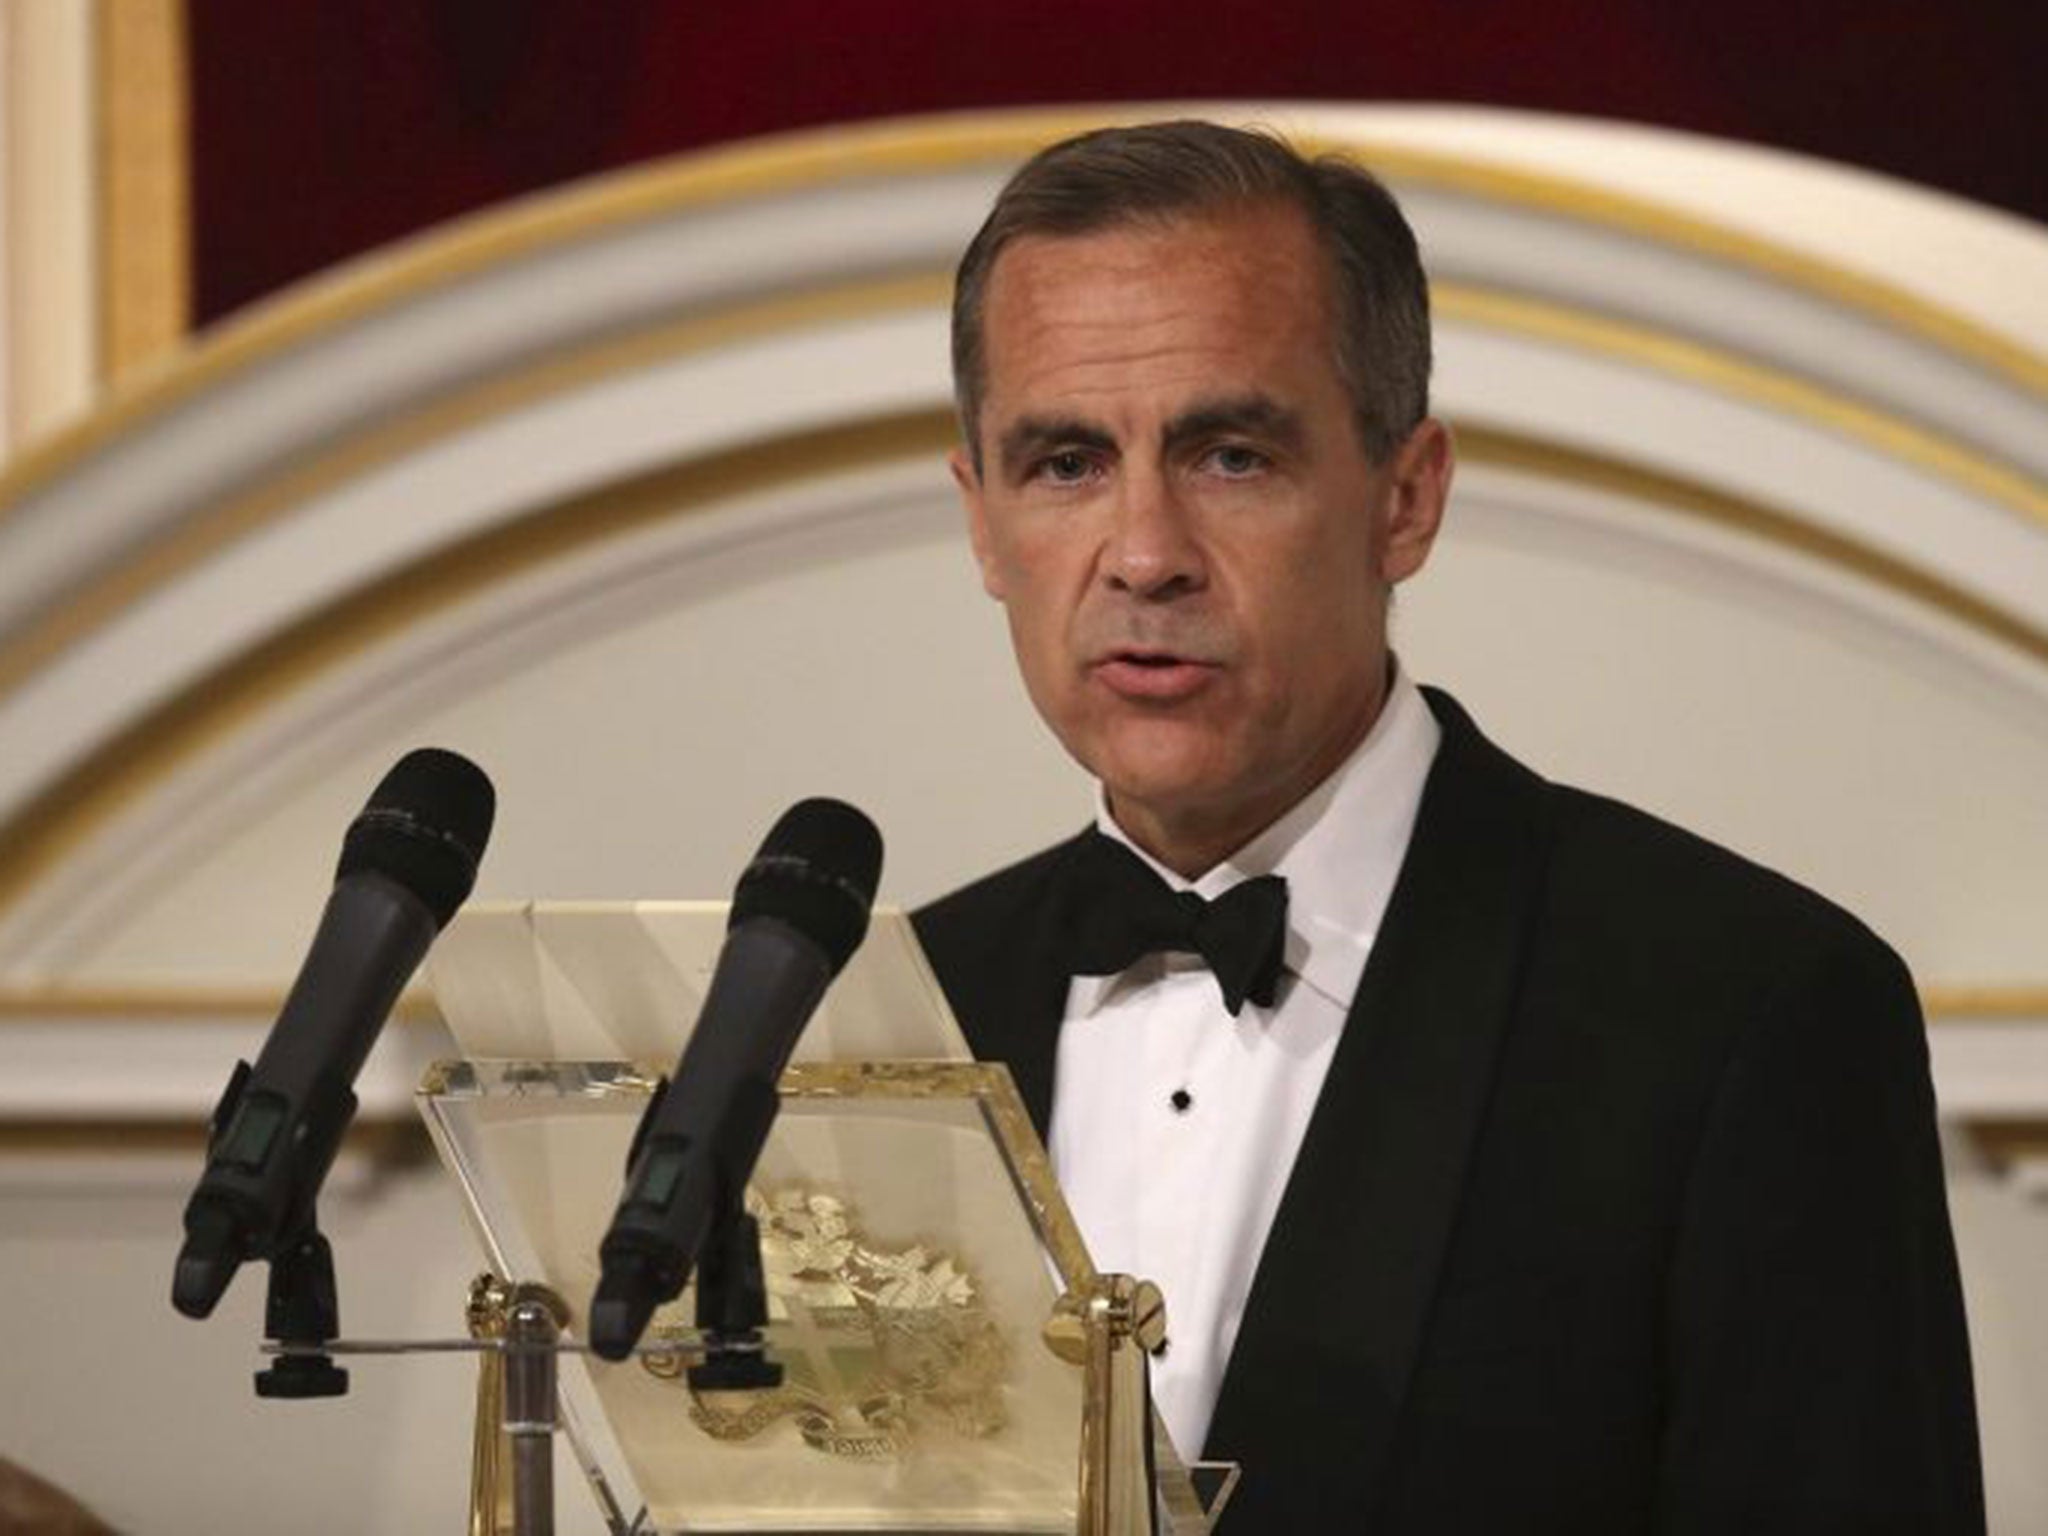 Mark Carney was speaking at his first Mansion House speech since becoming governor